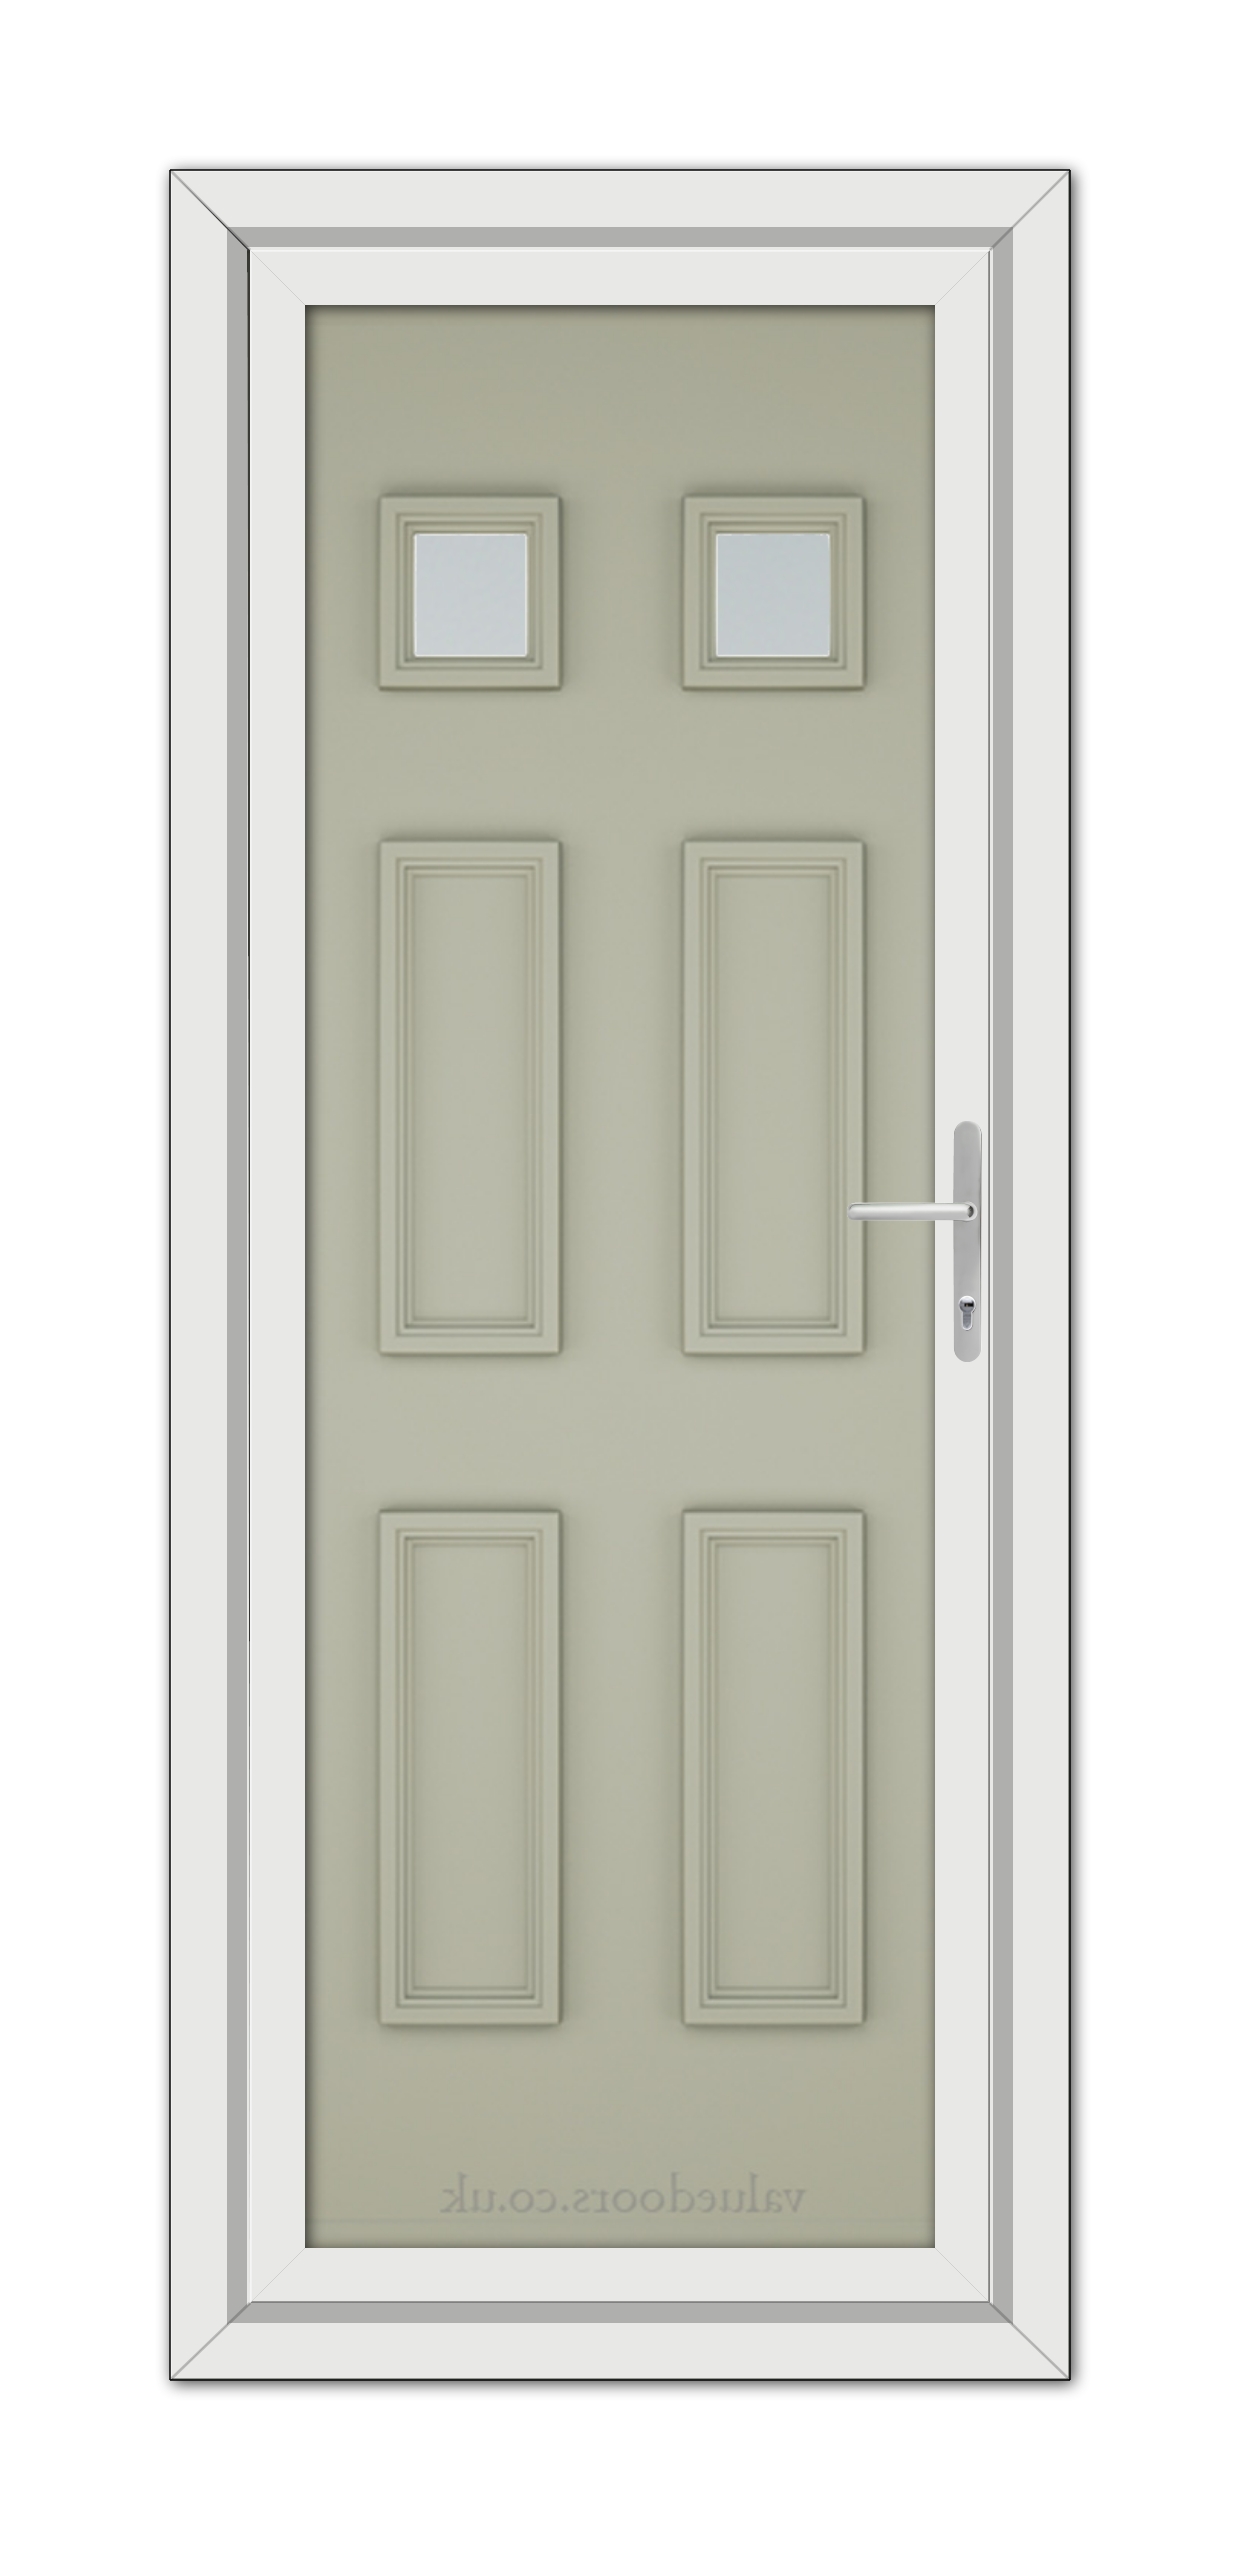 A Agate Grey Windsor uPVC Door with a metallic handle on the right side, set within a white frame, viewed from the front.